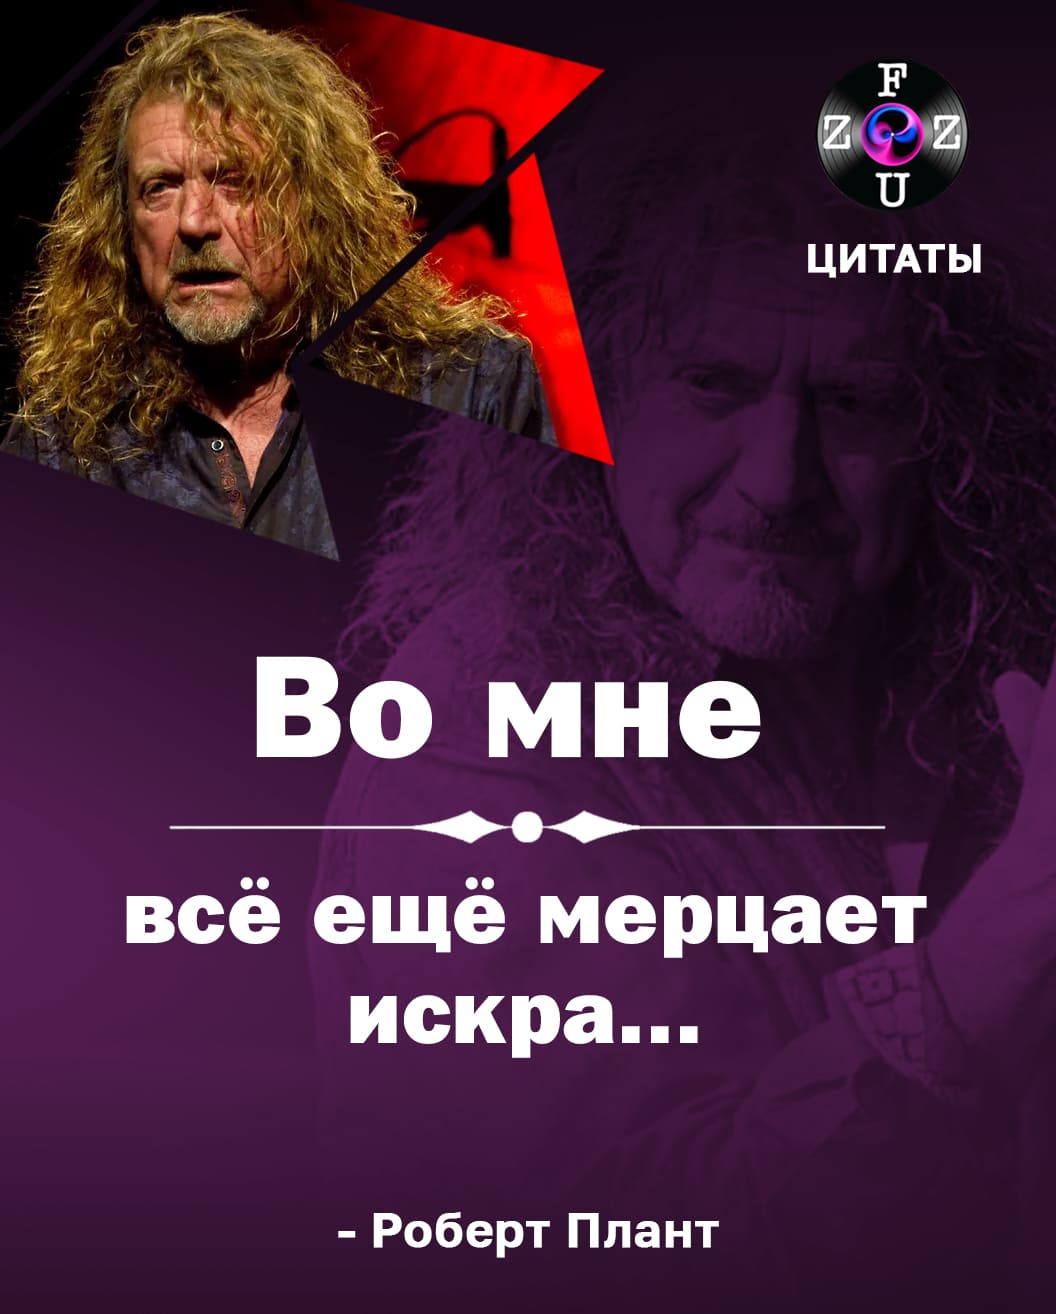 Quotes by Robert Plant